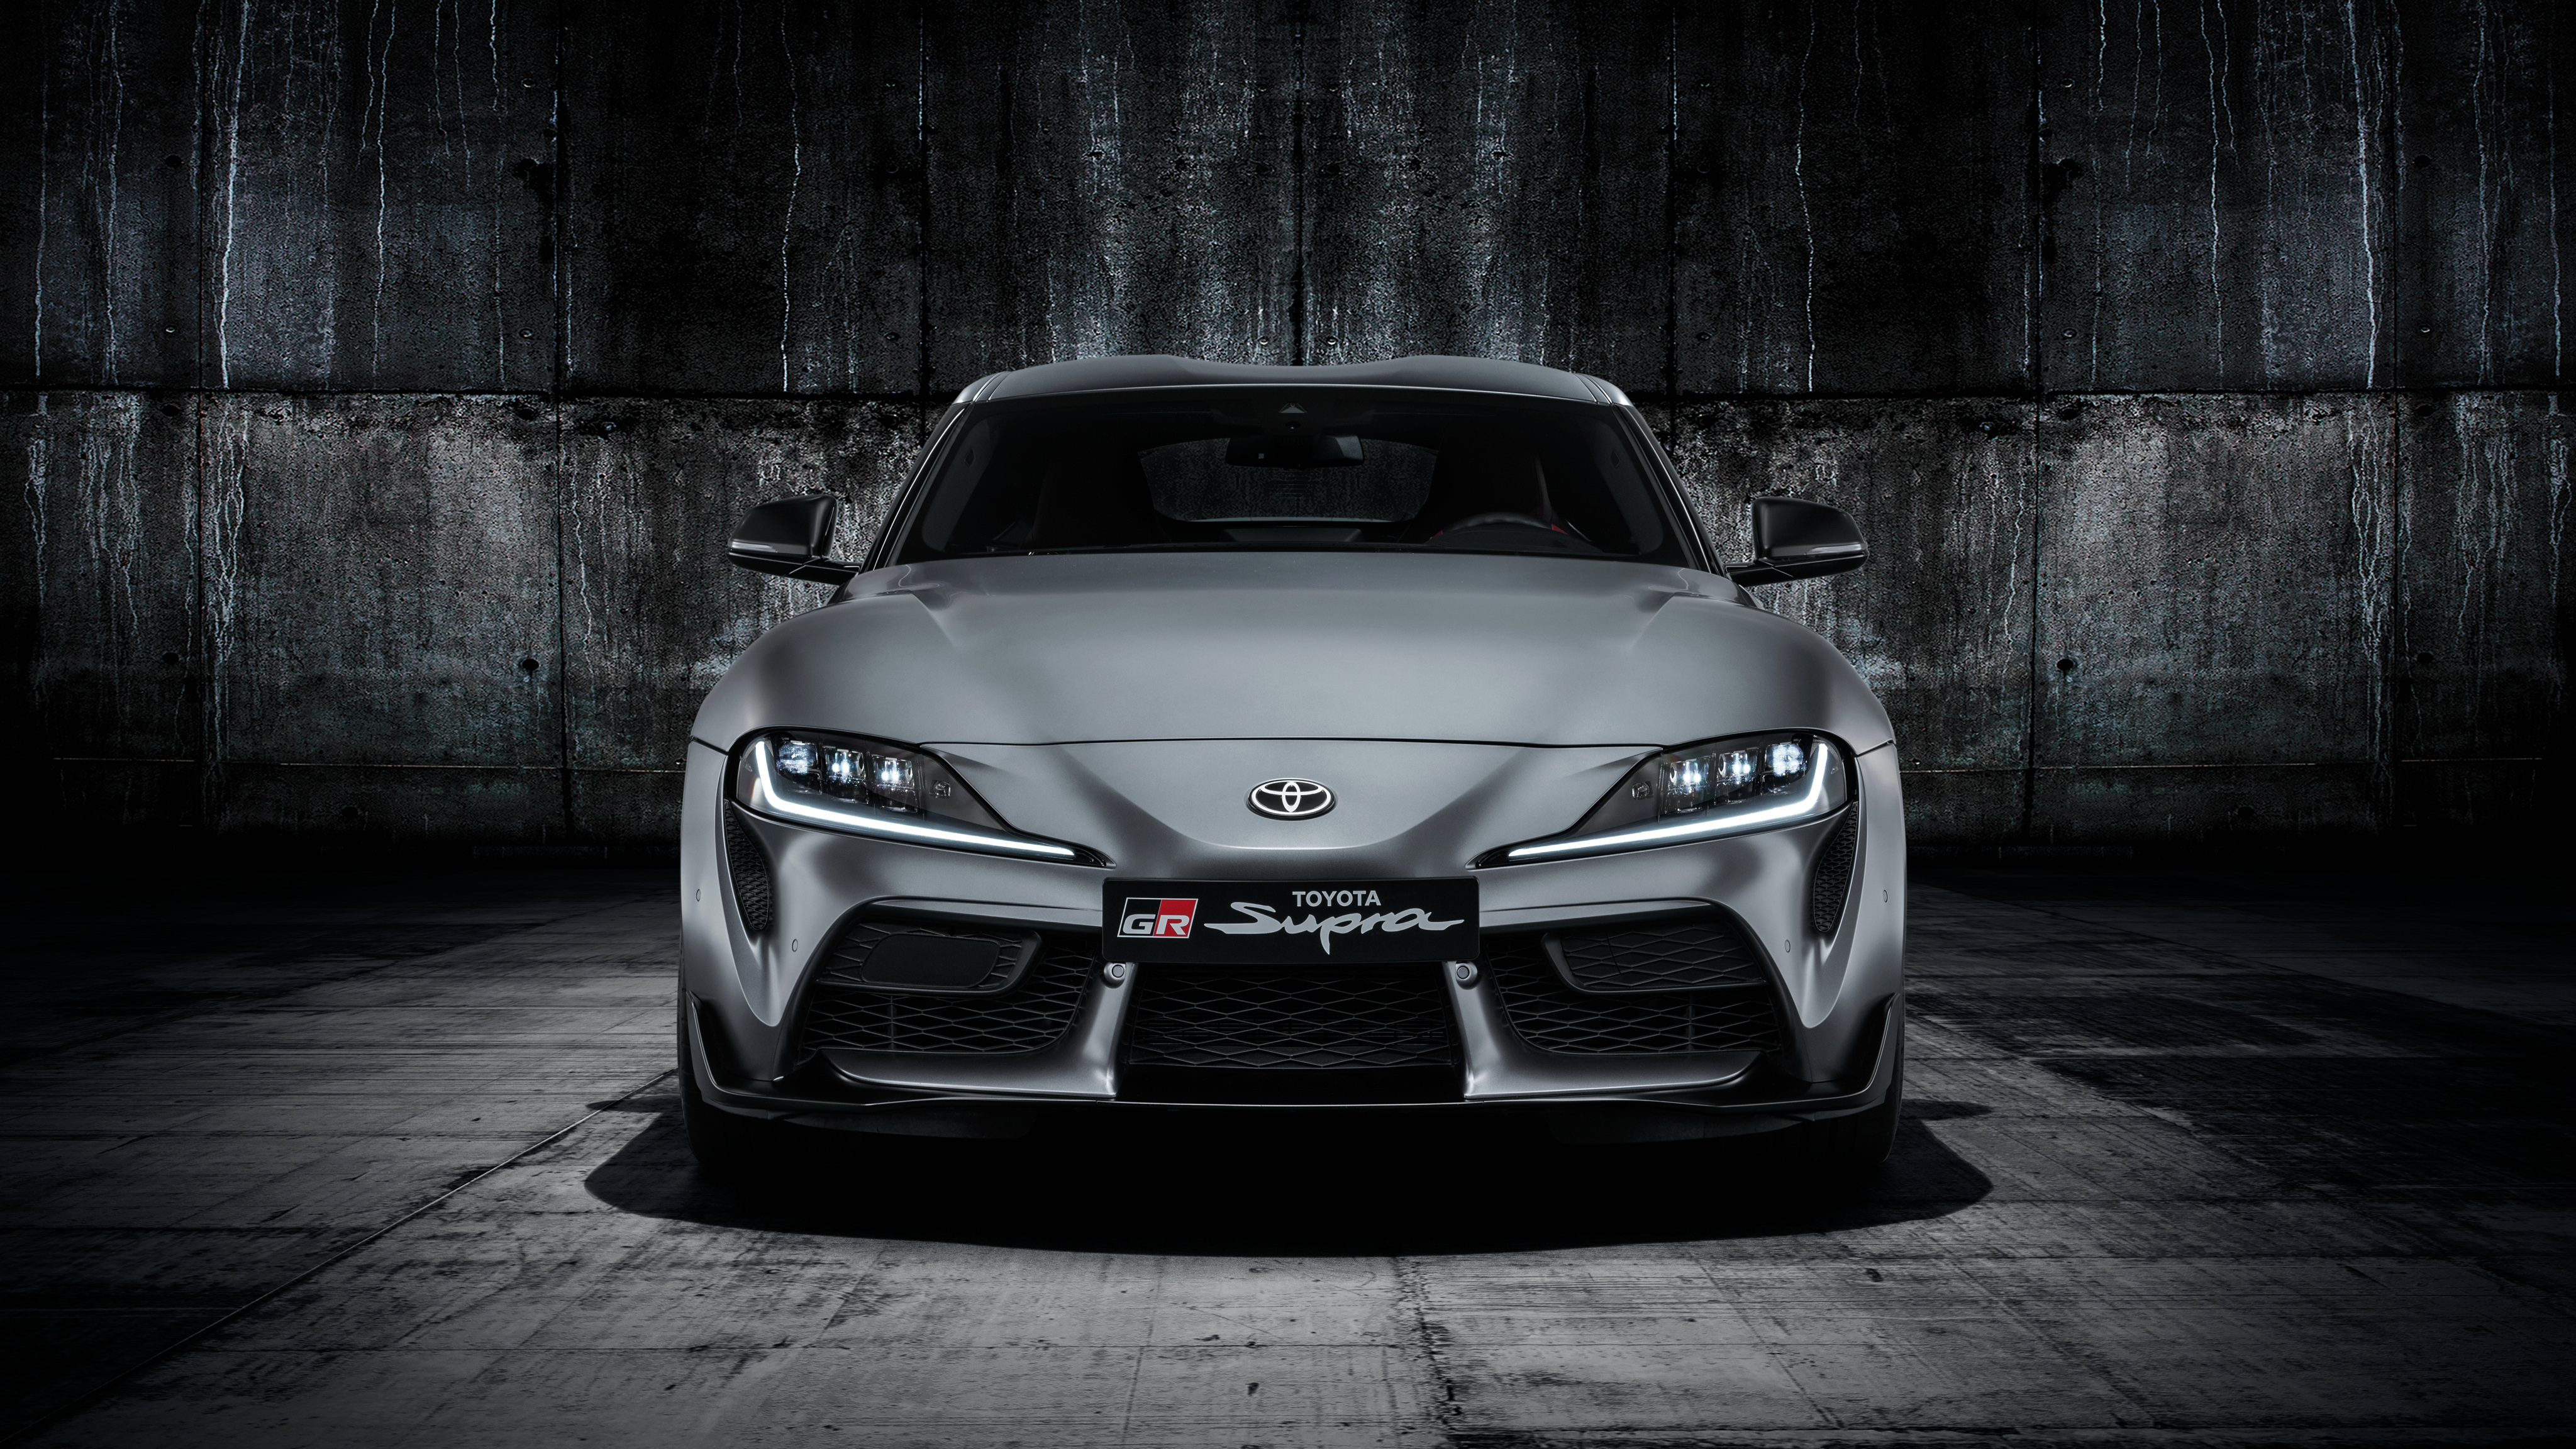 Toyota Gr Supra A90 Edition 2019 4k Wallpapers Hd Wallpapers